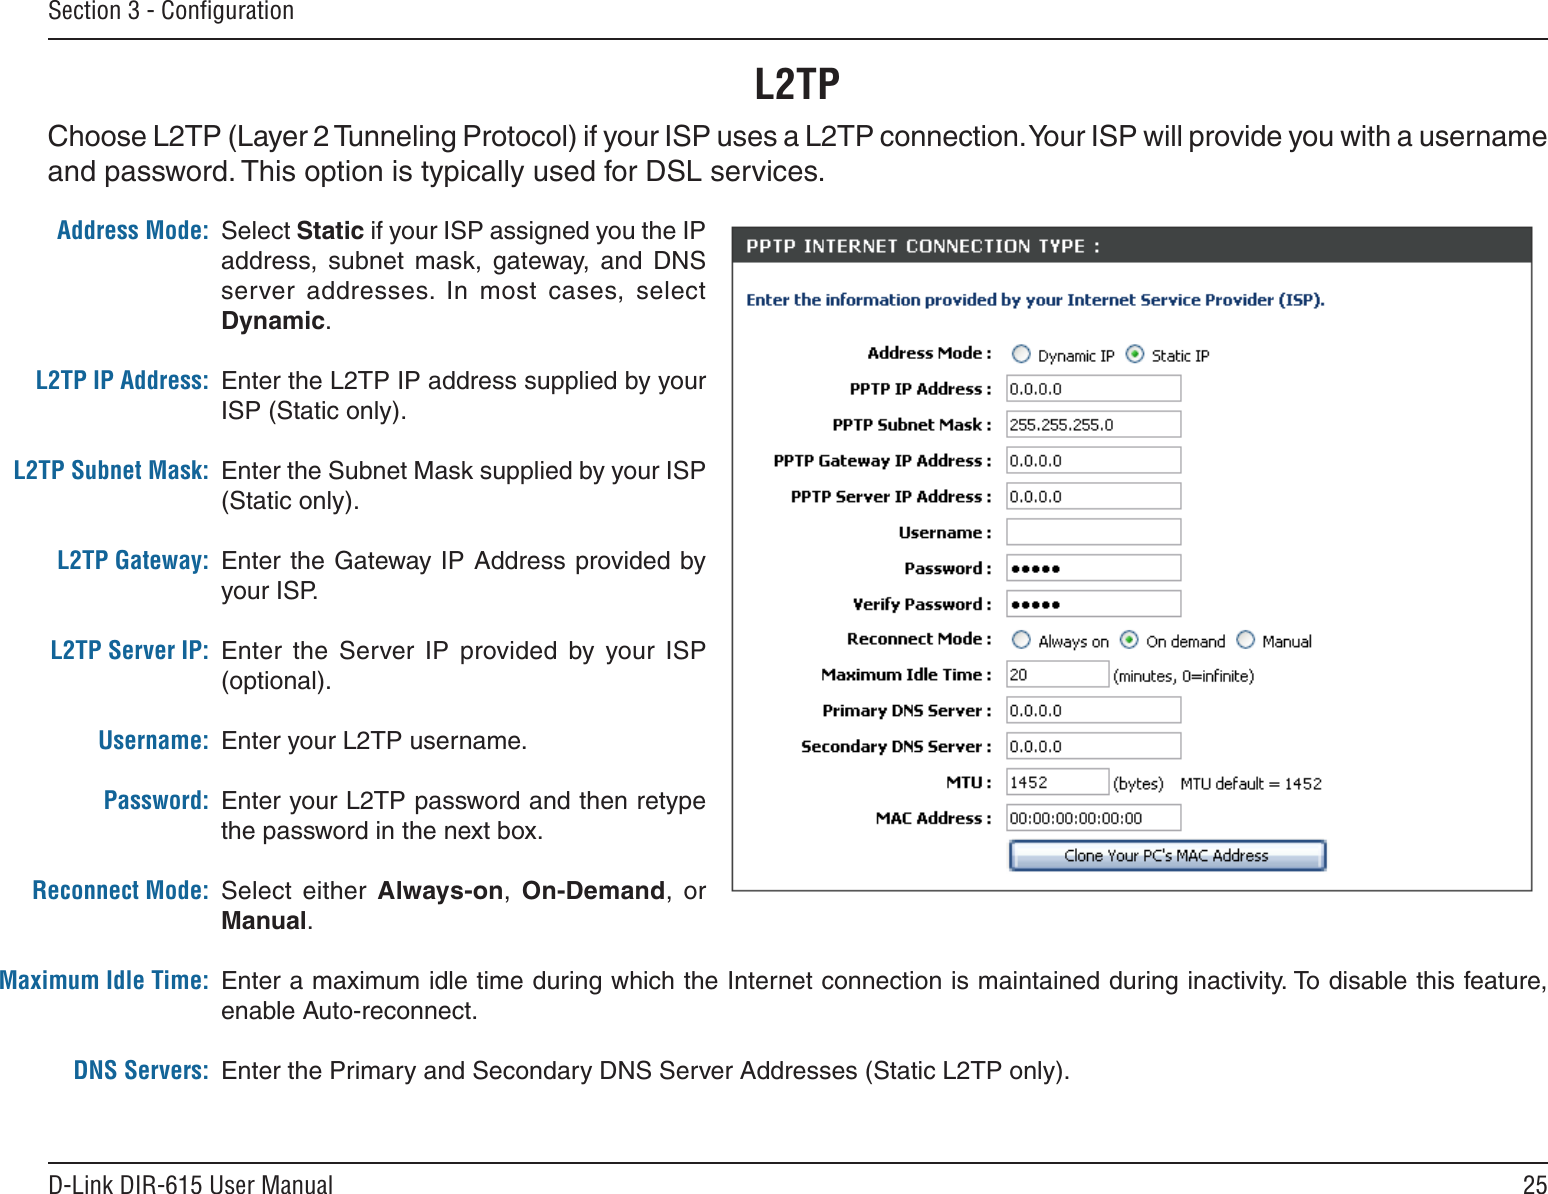 25D-Link DIR-615 User ManualSection 3 - ConﬁgurationSelect Static if your ISP assigned you the IP address,  subnet  mask,  gateway,  and  DNS server  addresses.  In  most  cases,  select Dynamic.Enter the L2TP IP address supplied by your ISP (Static only).Enter the Subnet Mask supplied by your ISP (Static only).Enter the Gateway IP Address provided by your ISP.Enter  the  Server IP  provided  by  your  ISP (optional).Enter your L2TP username.Enter your L2TP password and then retype the password in the next box.Select  either  Always-on,  On-Demand,  or Manual.Enter a maximum idle time during which the Internet connection is maintained during inactivity. To disable this feature, enable Auto-reconnect.Enter the Primary and Secondary DNS Server Addresses (Static L2TP only).Address Mode:L2TP IP Address:L2TP Subnet Mask:L2TP Gateway:L2TP Server IP:Username:Password:Reconnect Mode:Maximum Idle Time: DNS Servers:L2TPChoose L2TP (Layer 2 Tunneling Protocol) if your ISP uses a L2TP connection. Your ISP will provide you with a username and password. This option is typically used for DSL services. 